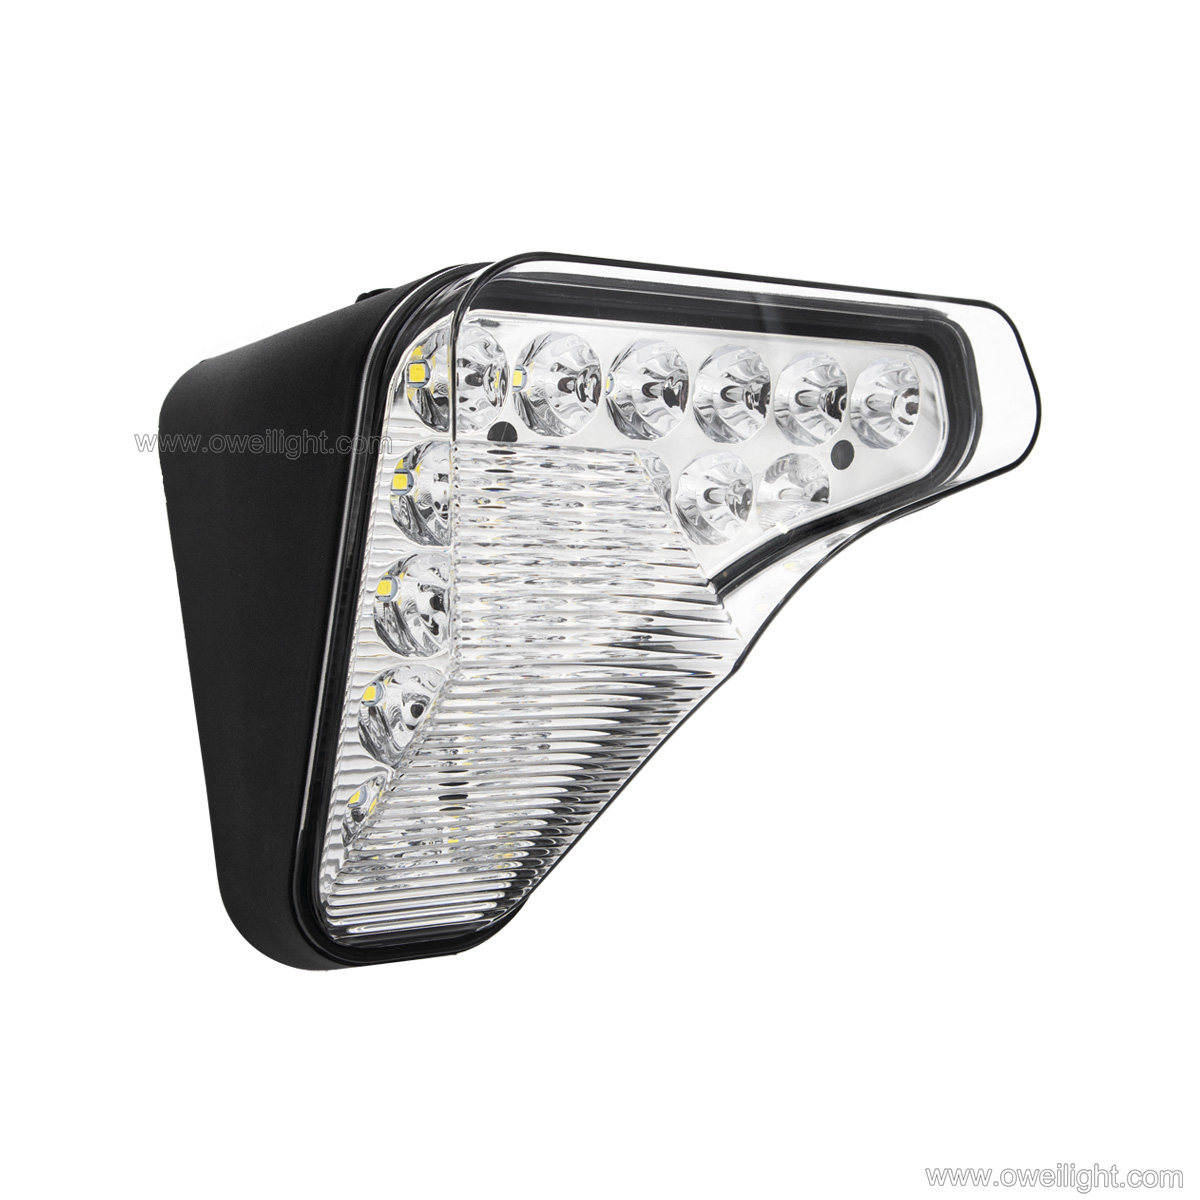 Agricultural Light - 9091-90W